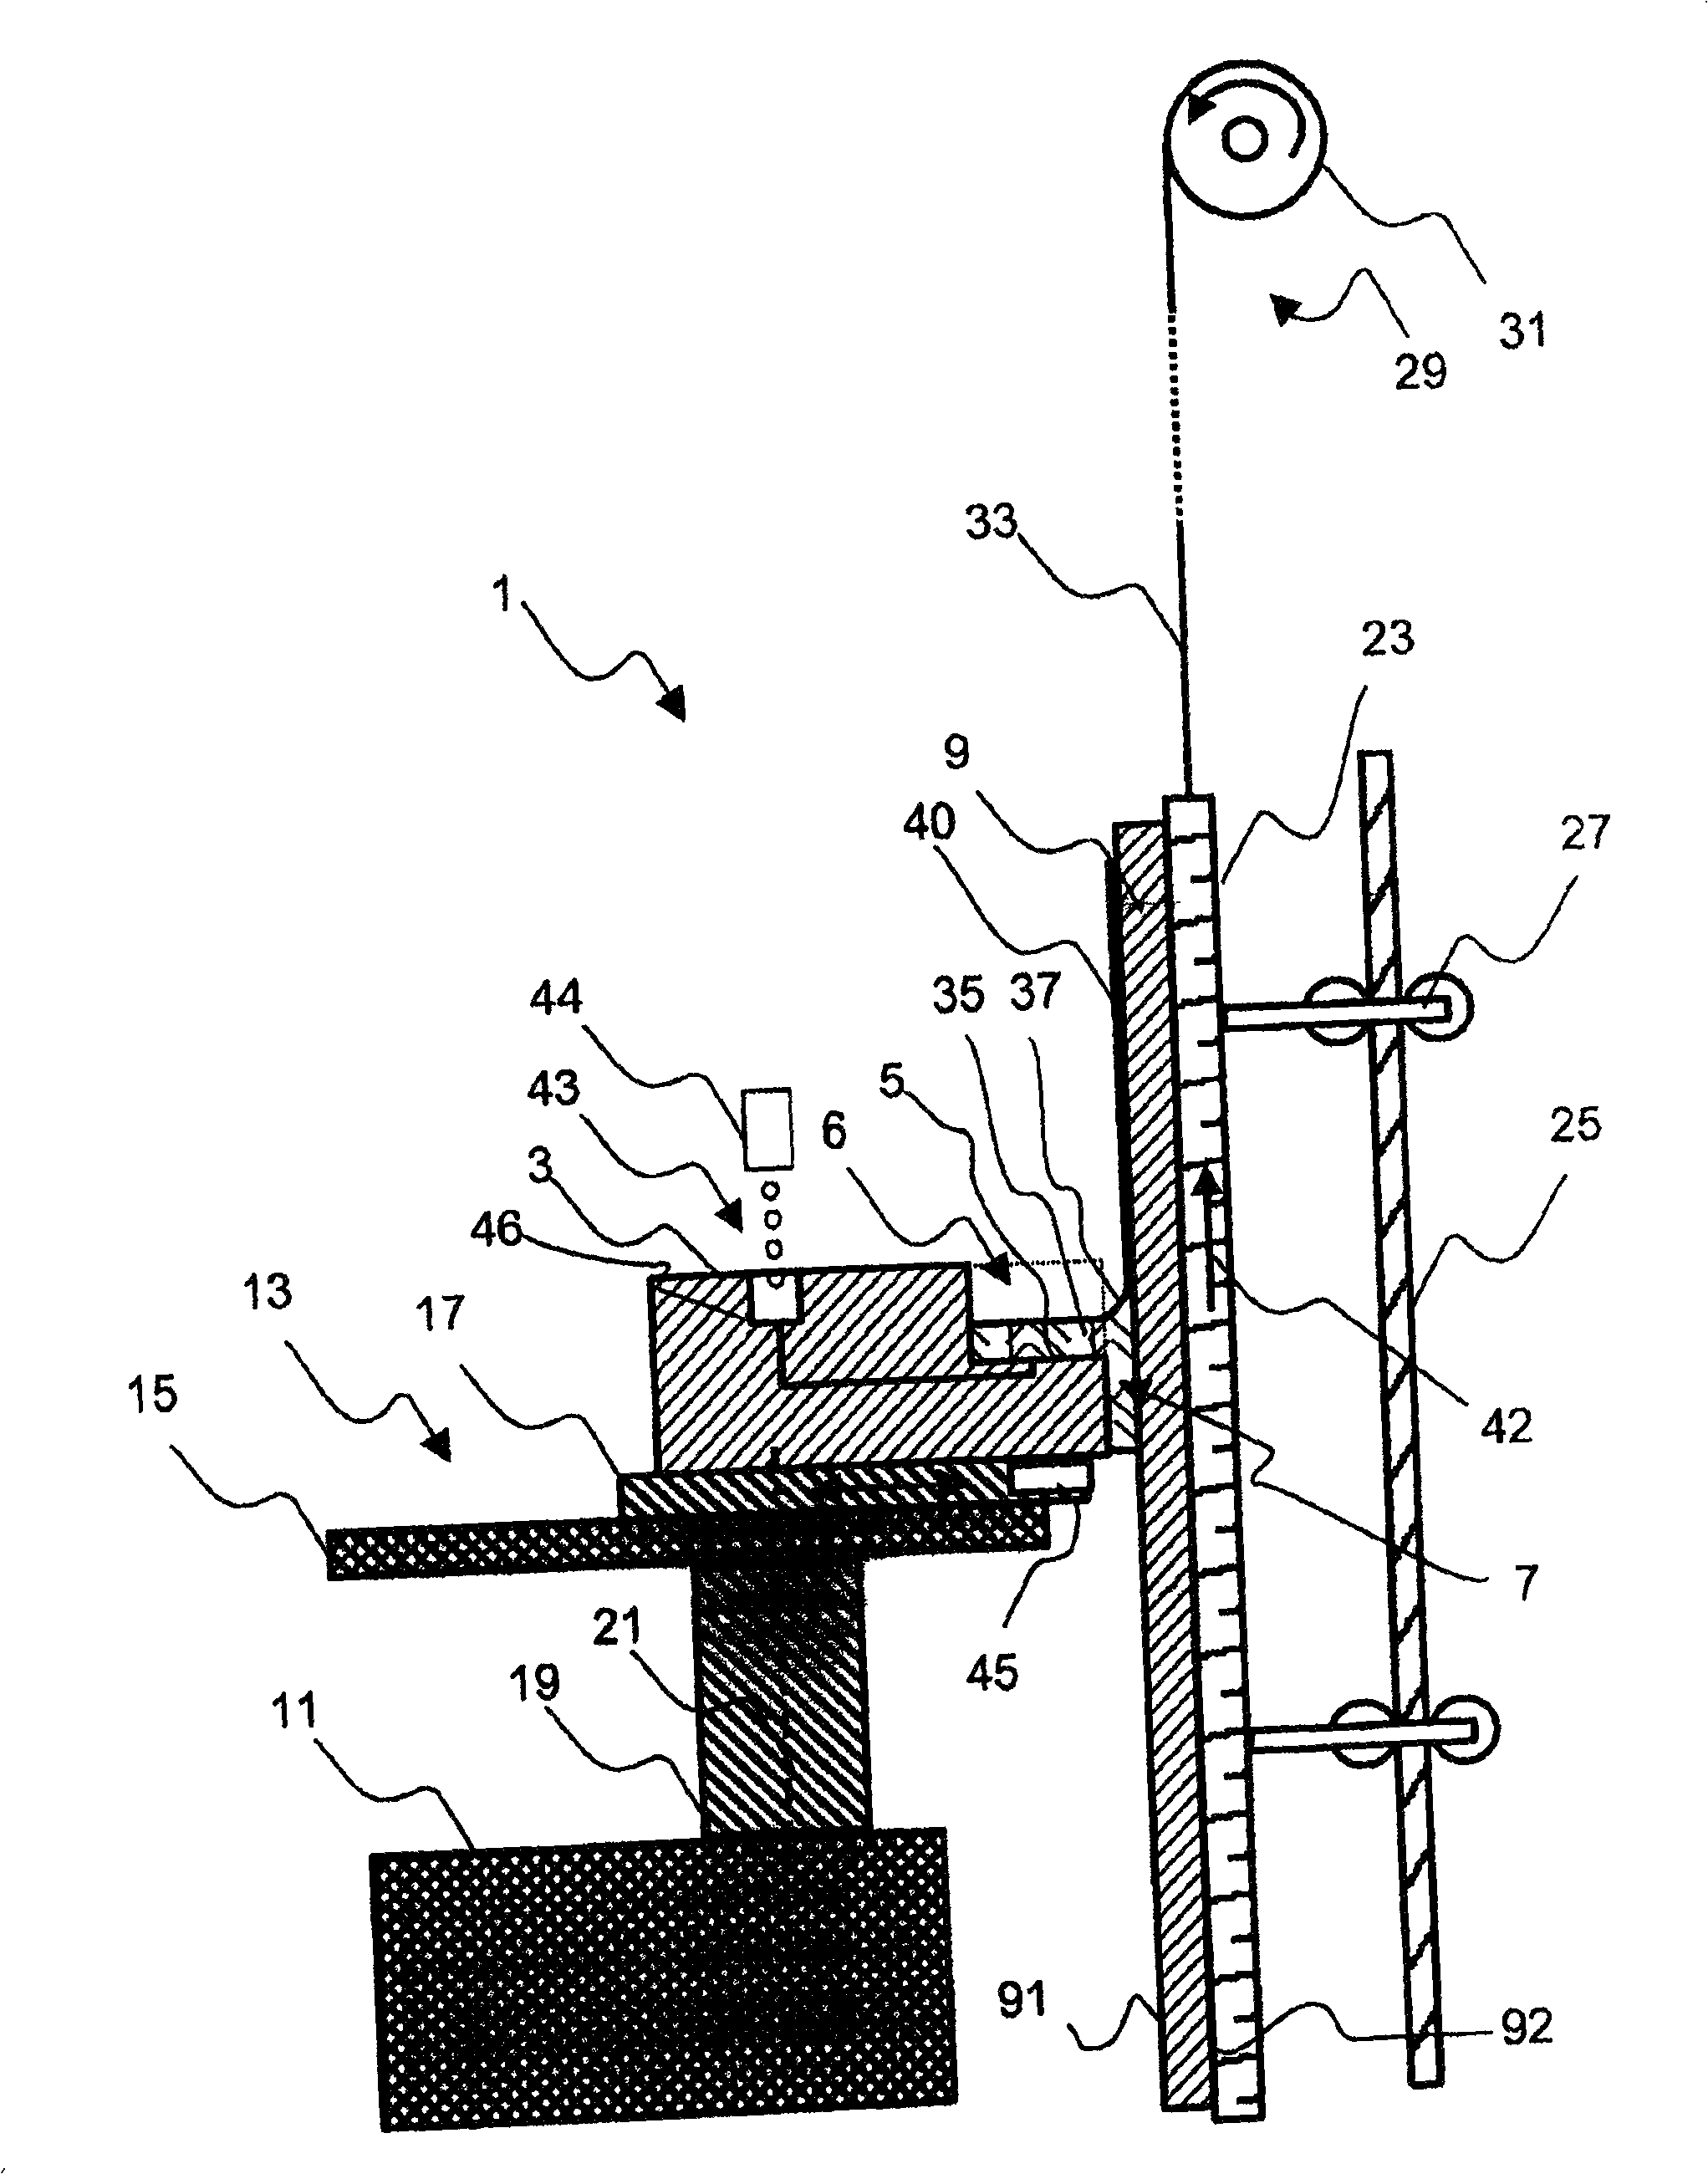 Process and apparatus for coating with a liquid